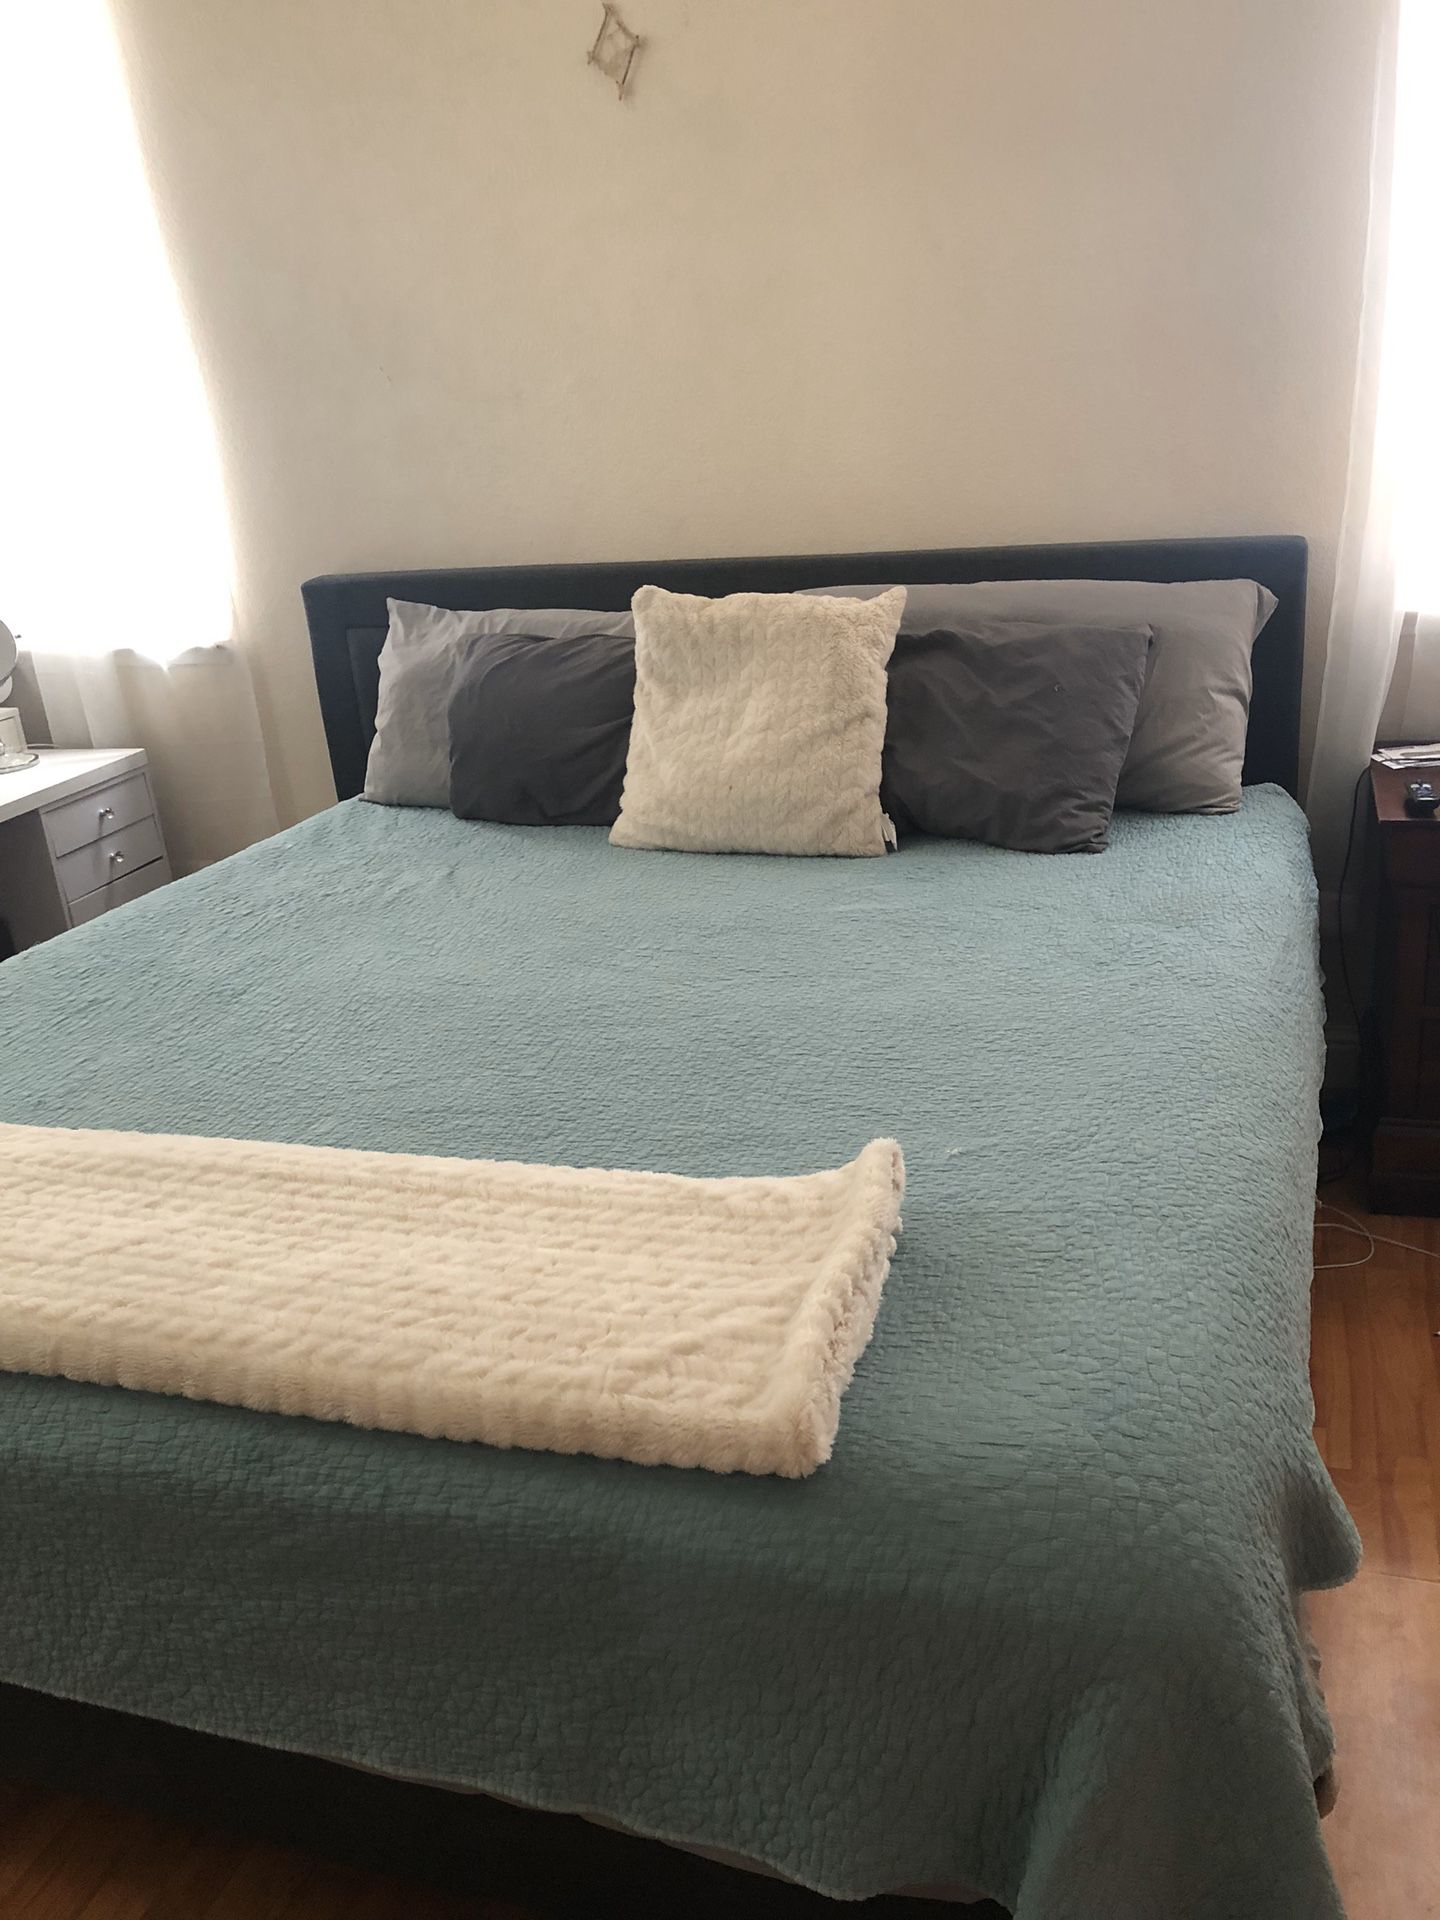 KING size mattress and bed frame